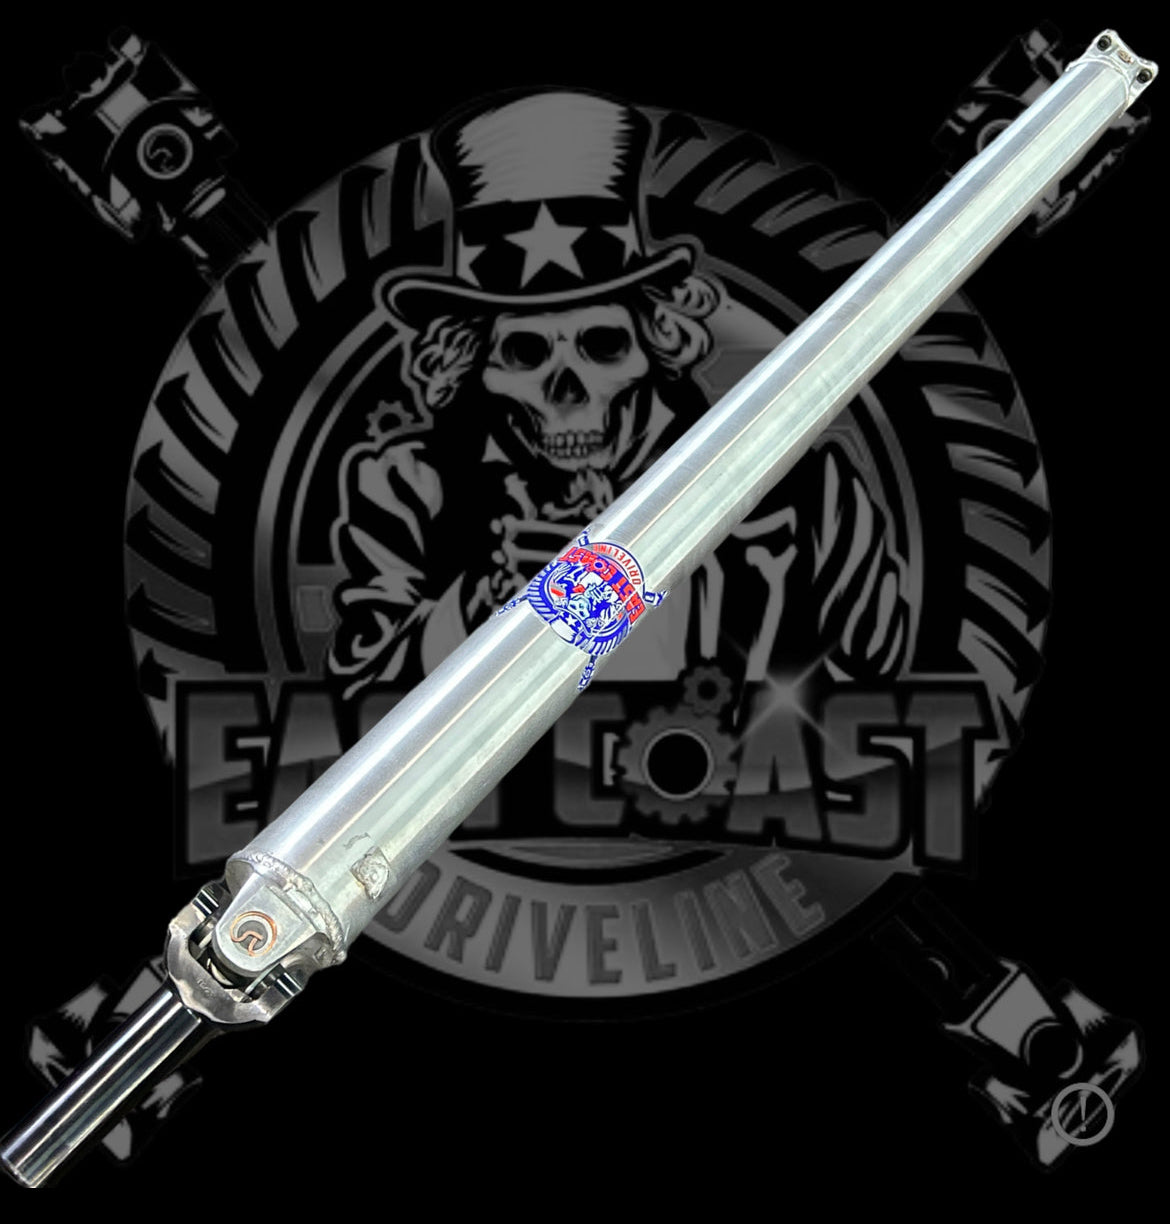 2023 Ford F-150 5.0L V8 Third-Gen Coyote AWD/4WD HD Carbon Fiber or Aluminum Rear Driveshaft for 9.75” Rear Differential ONLY! Replaces Ford OEM ML3Z4602AU, ML3Z-4602-AU